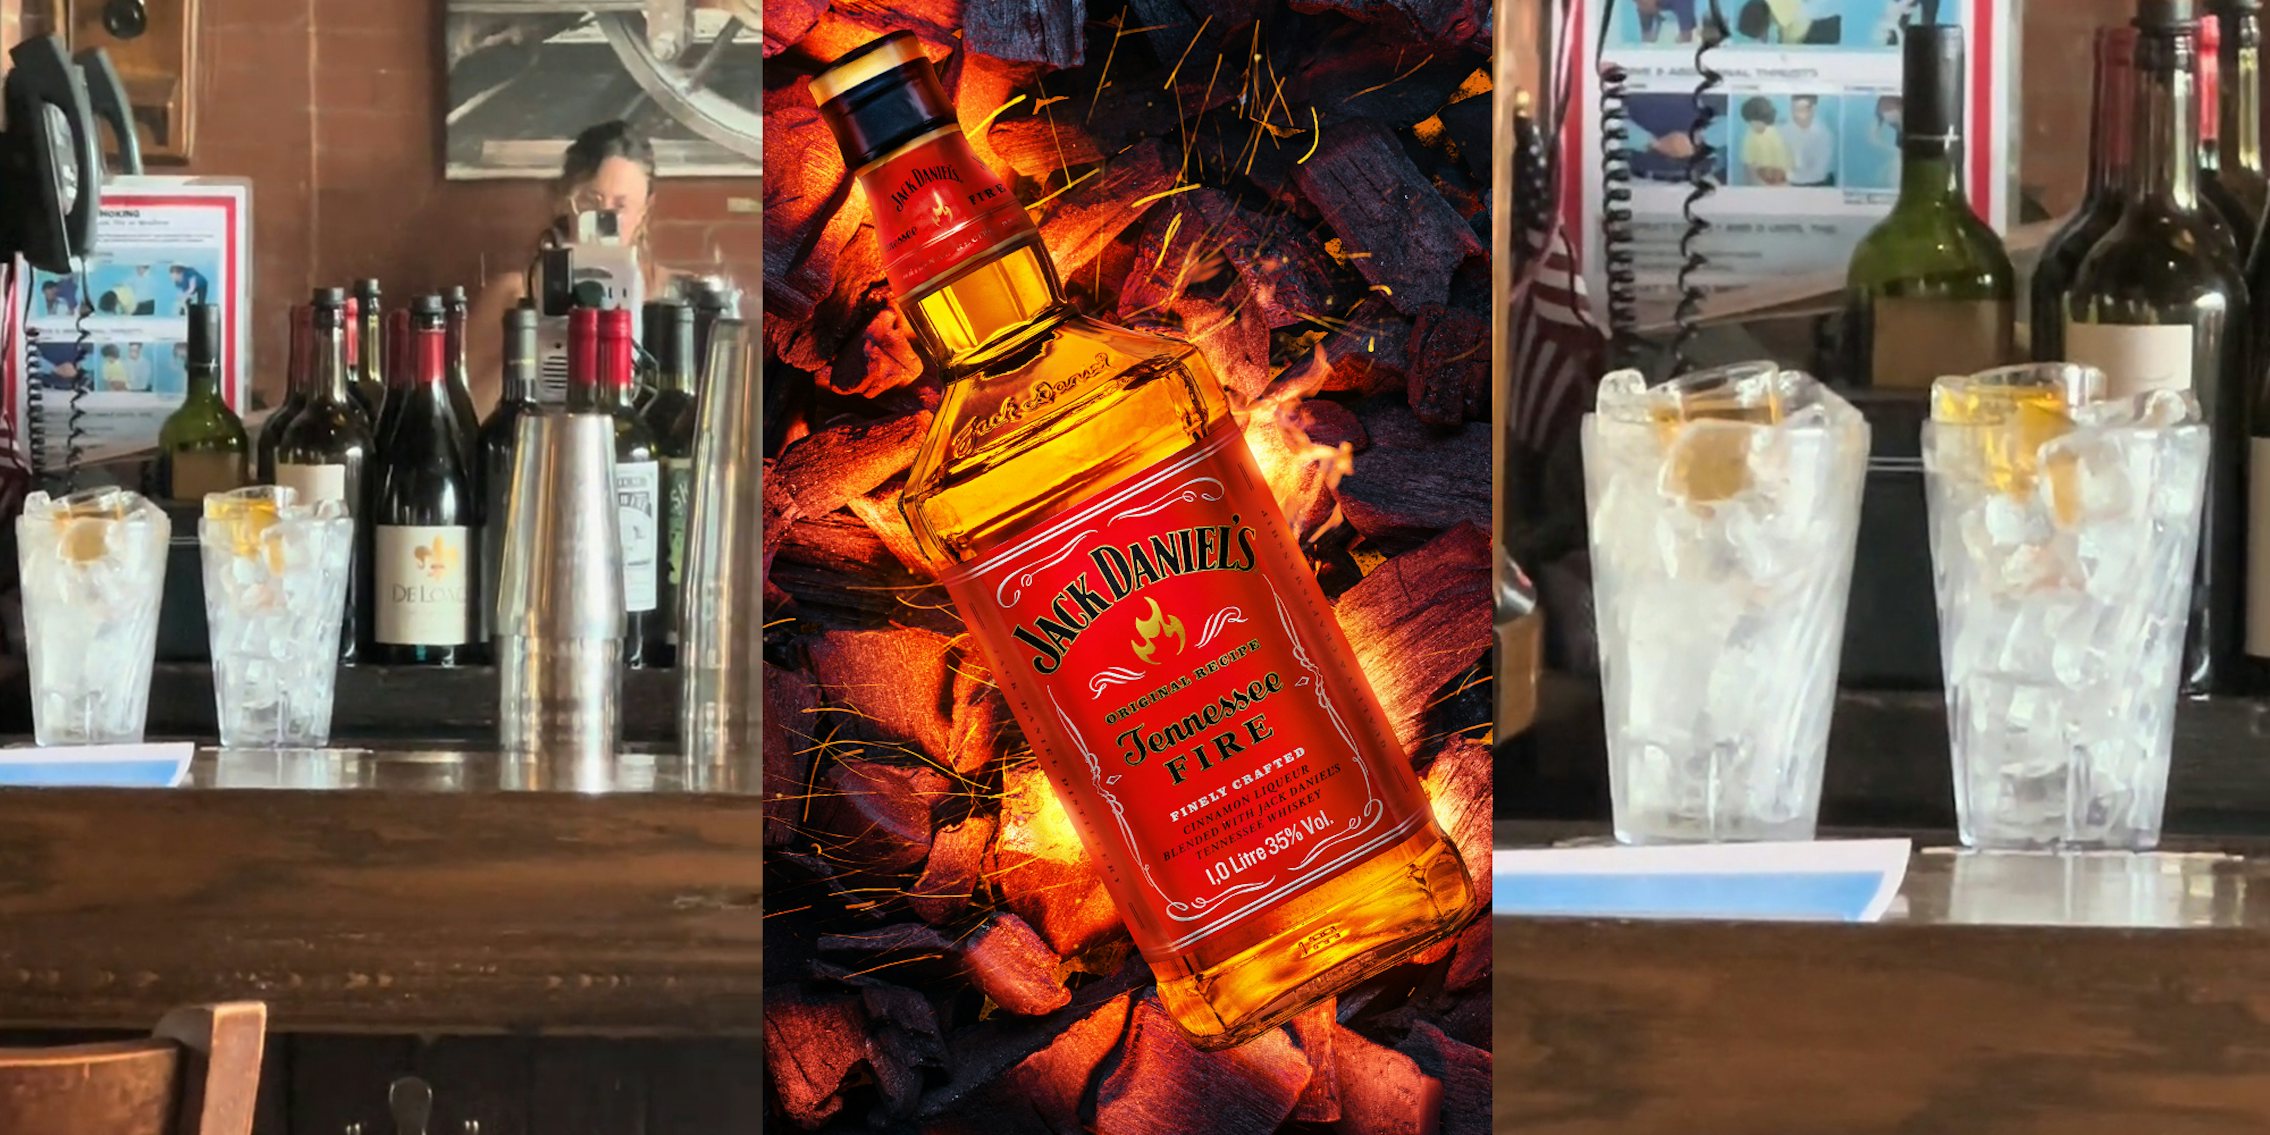 Customer orders 2 shots of Jack Daniels Tennessee Fire, chilled. It backfires